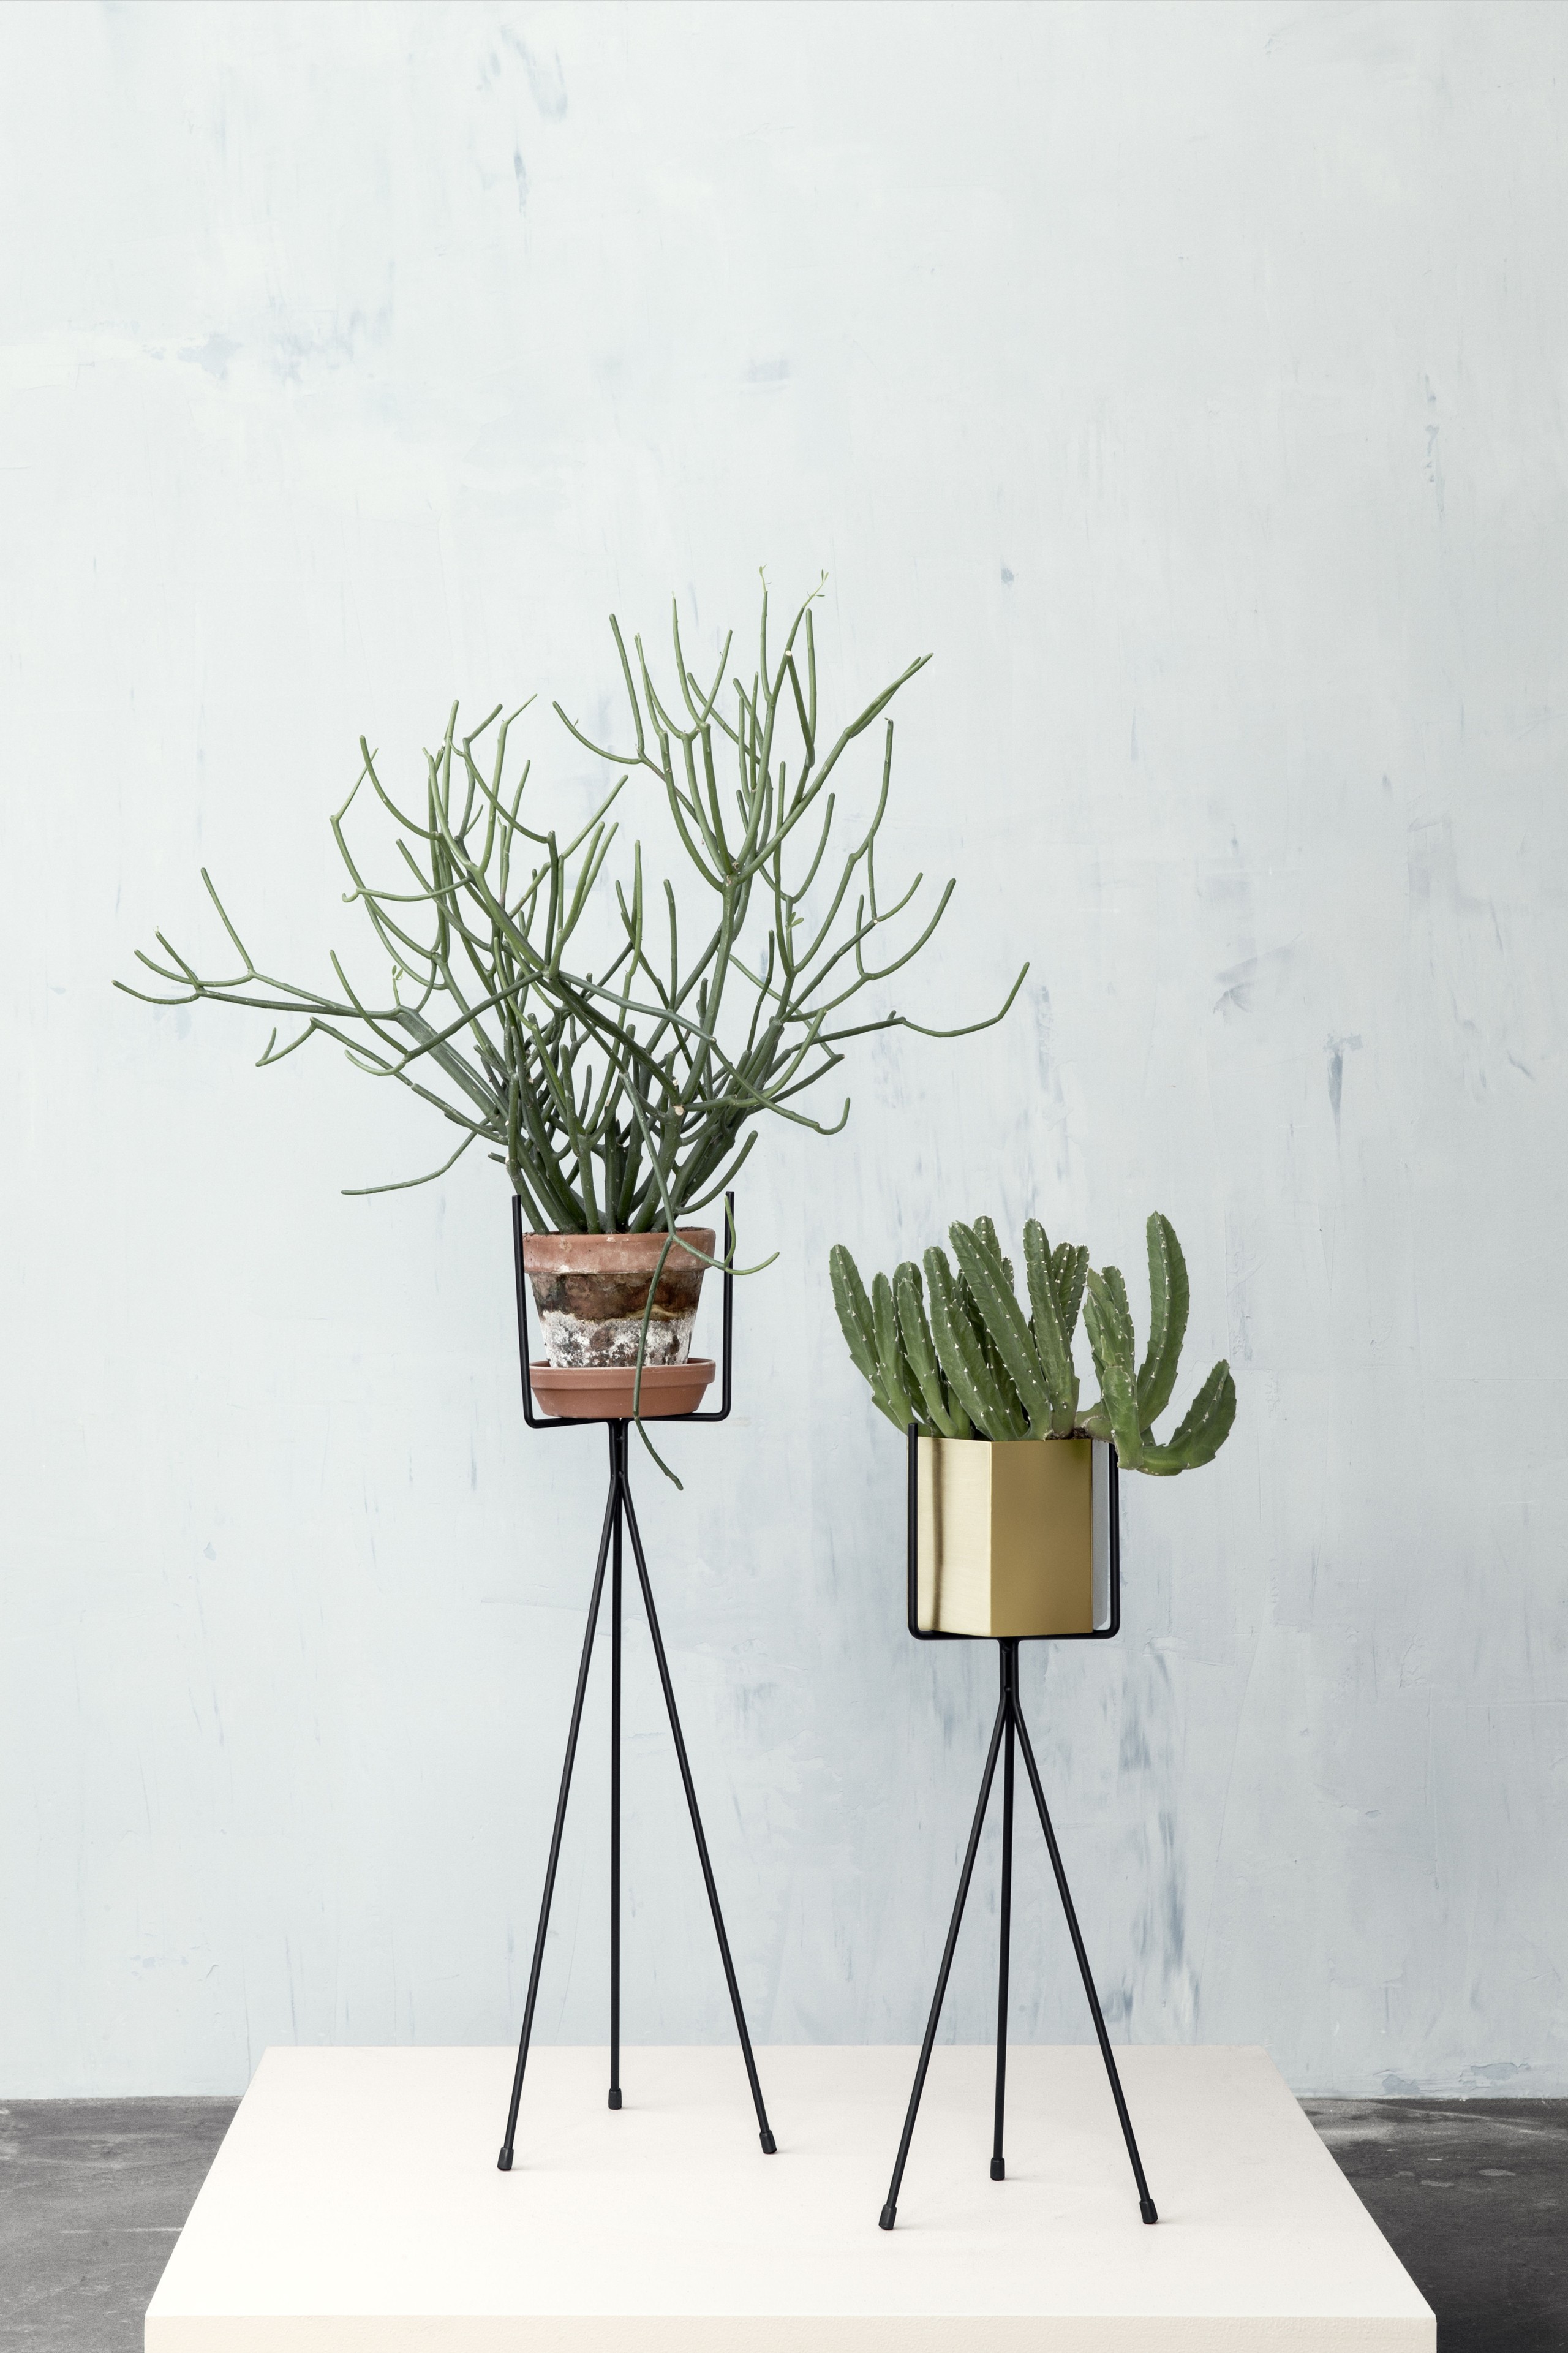 Above a ferm living plant stand comes in two heights